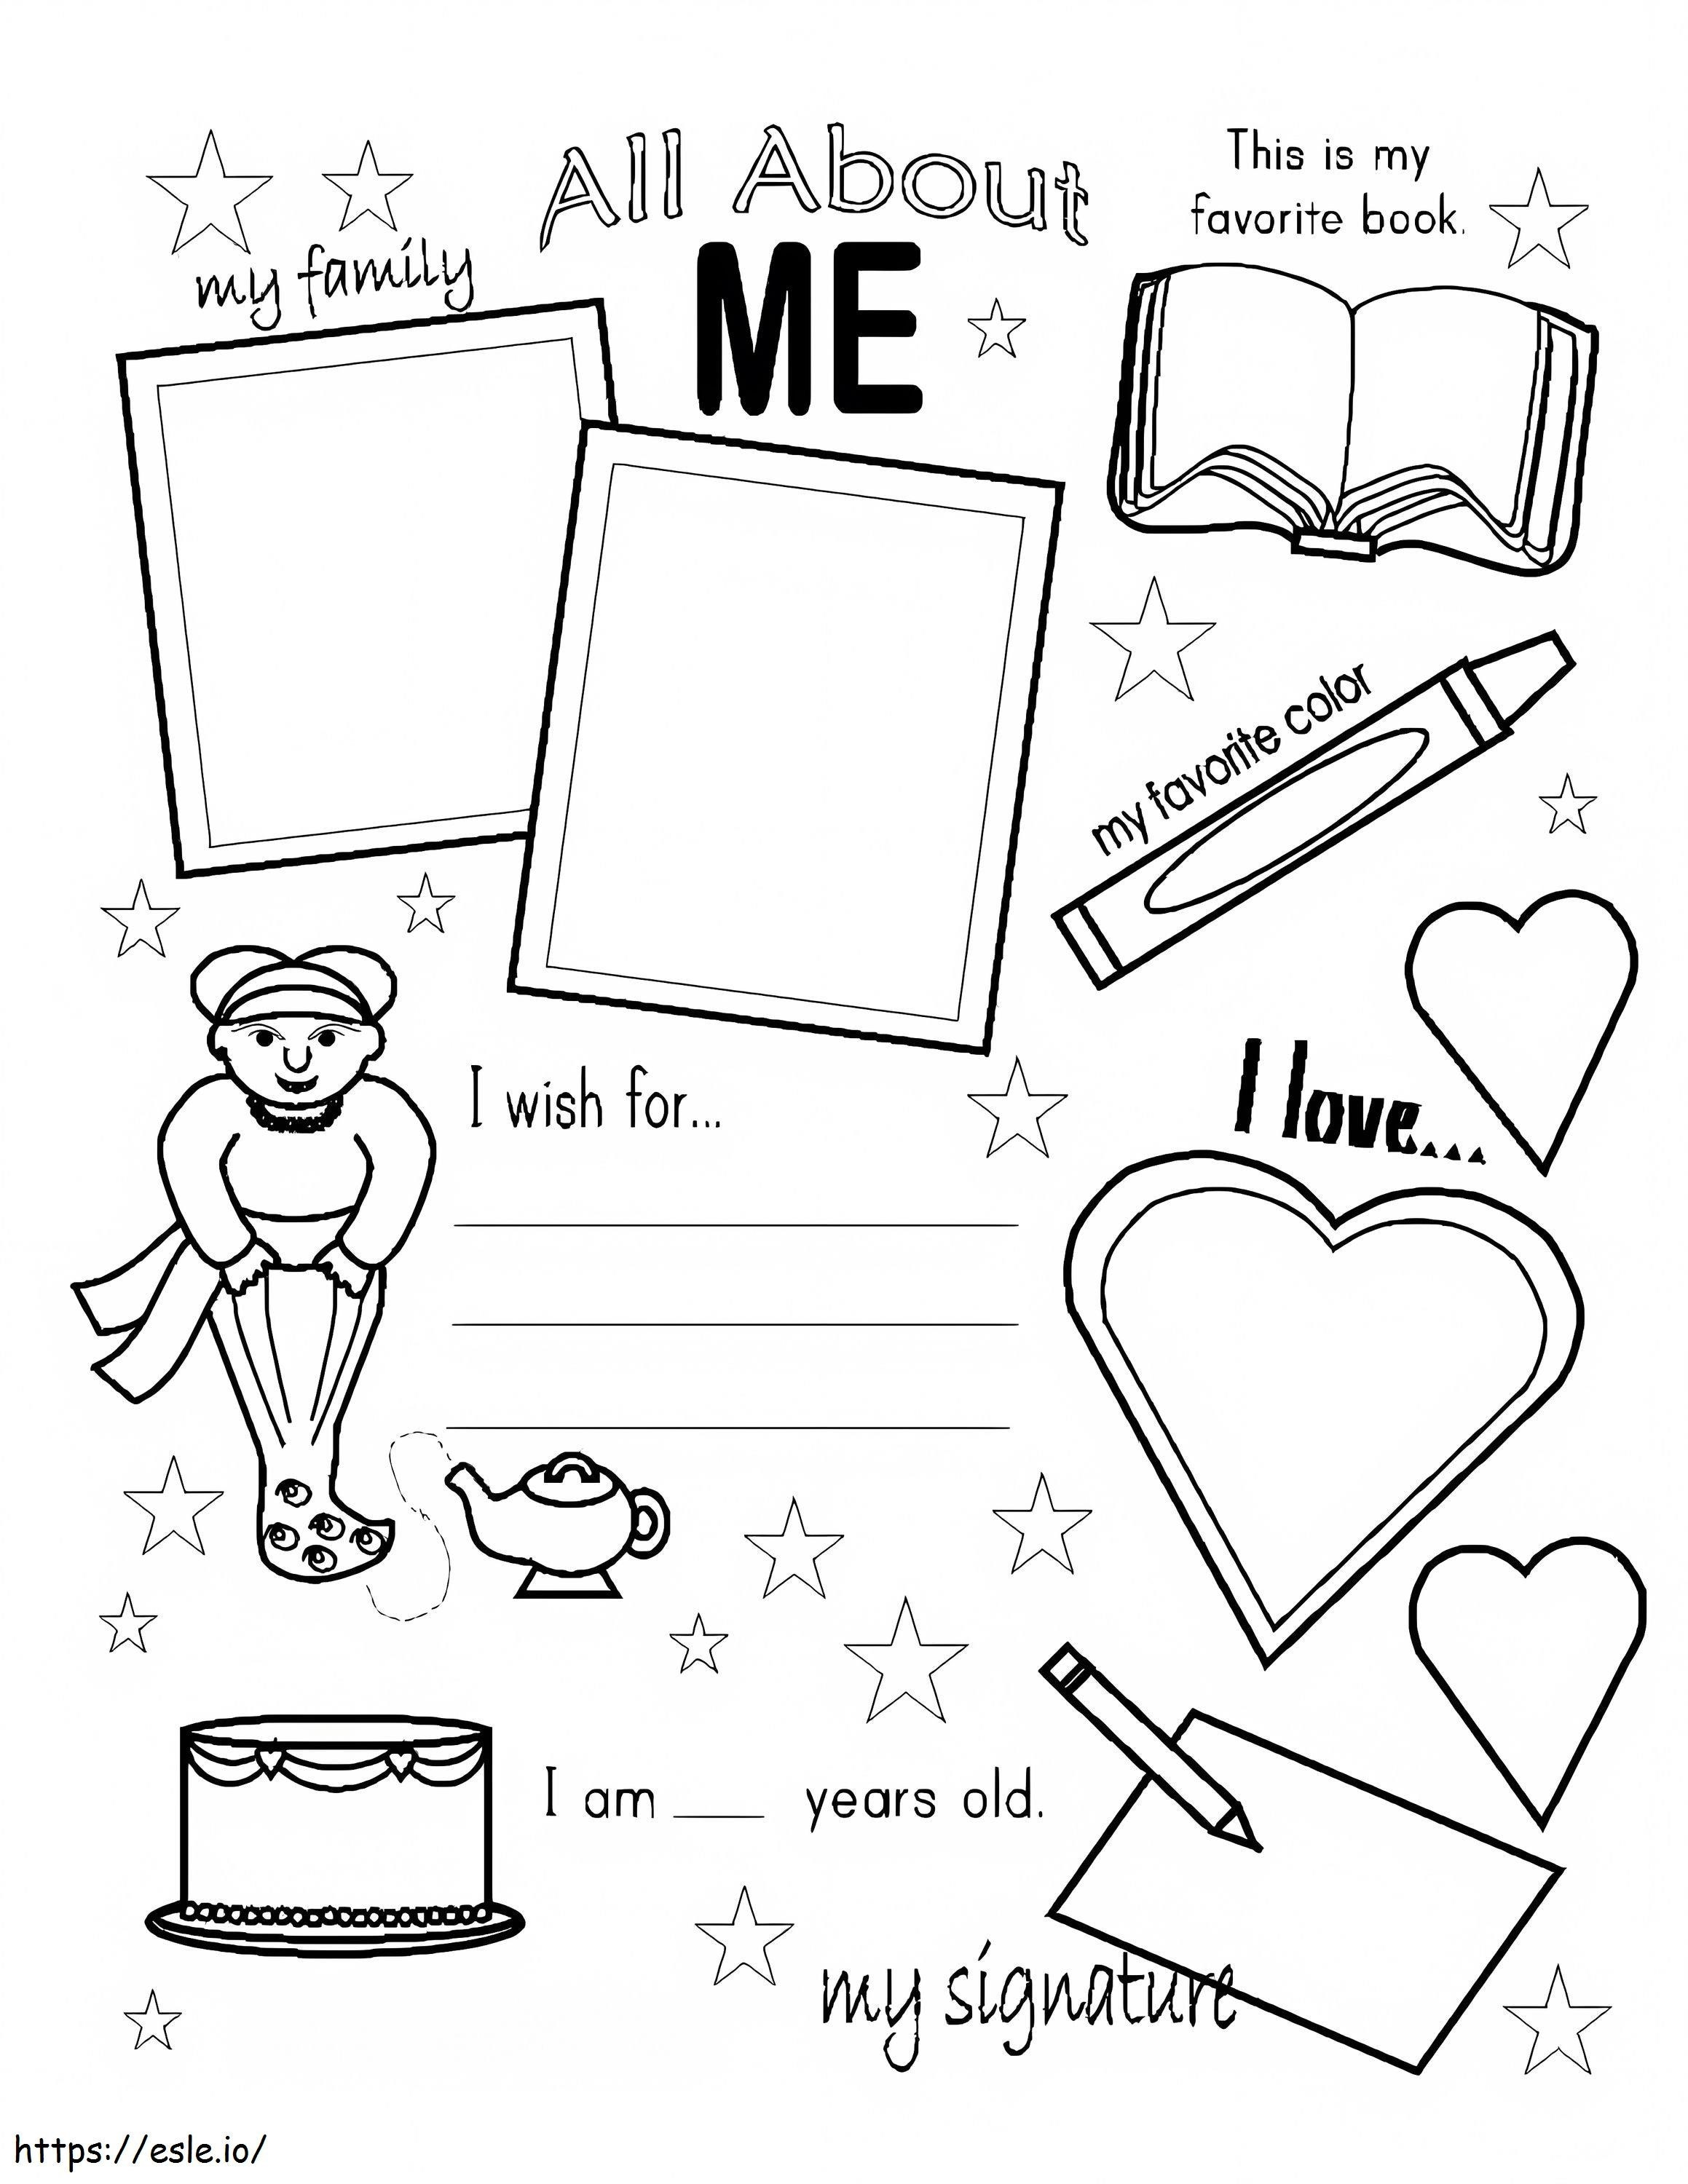 All About Me 12 coloring page